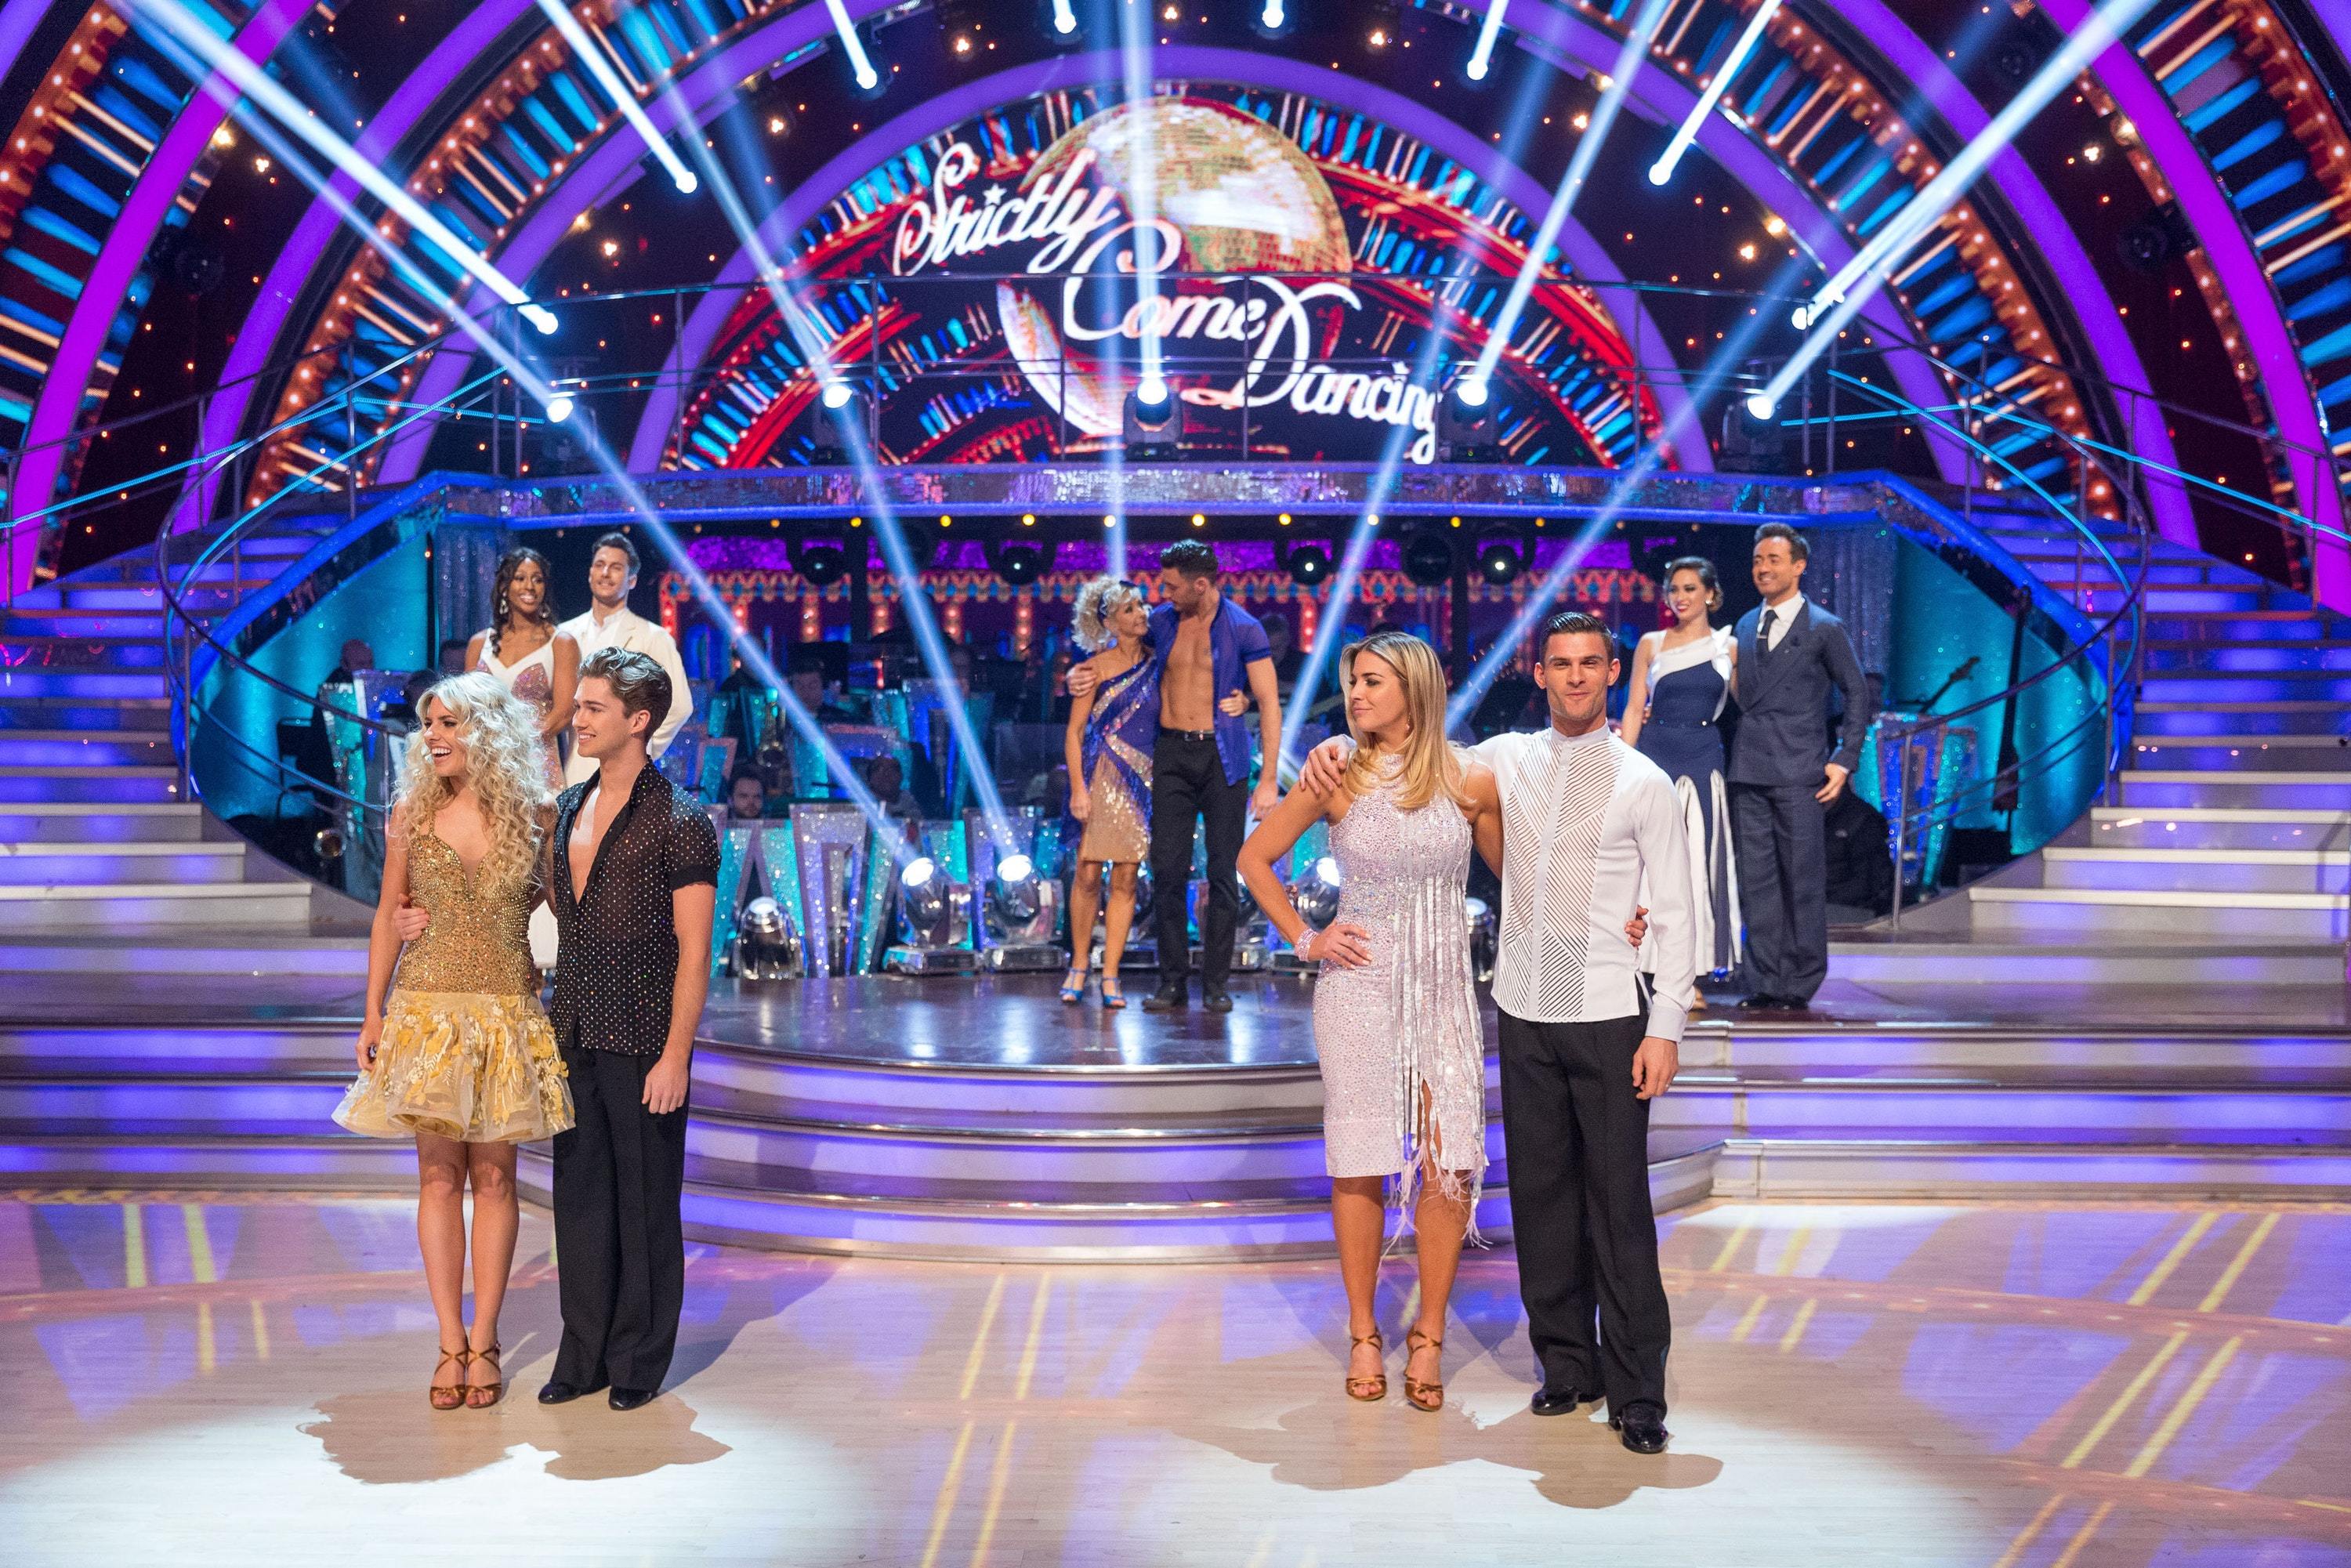 The Strictly Come Dancing final takes place this weekend (BBC/PA)